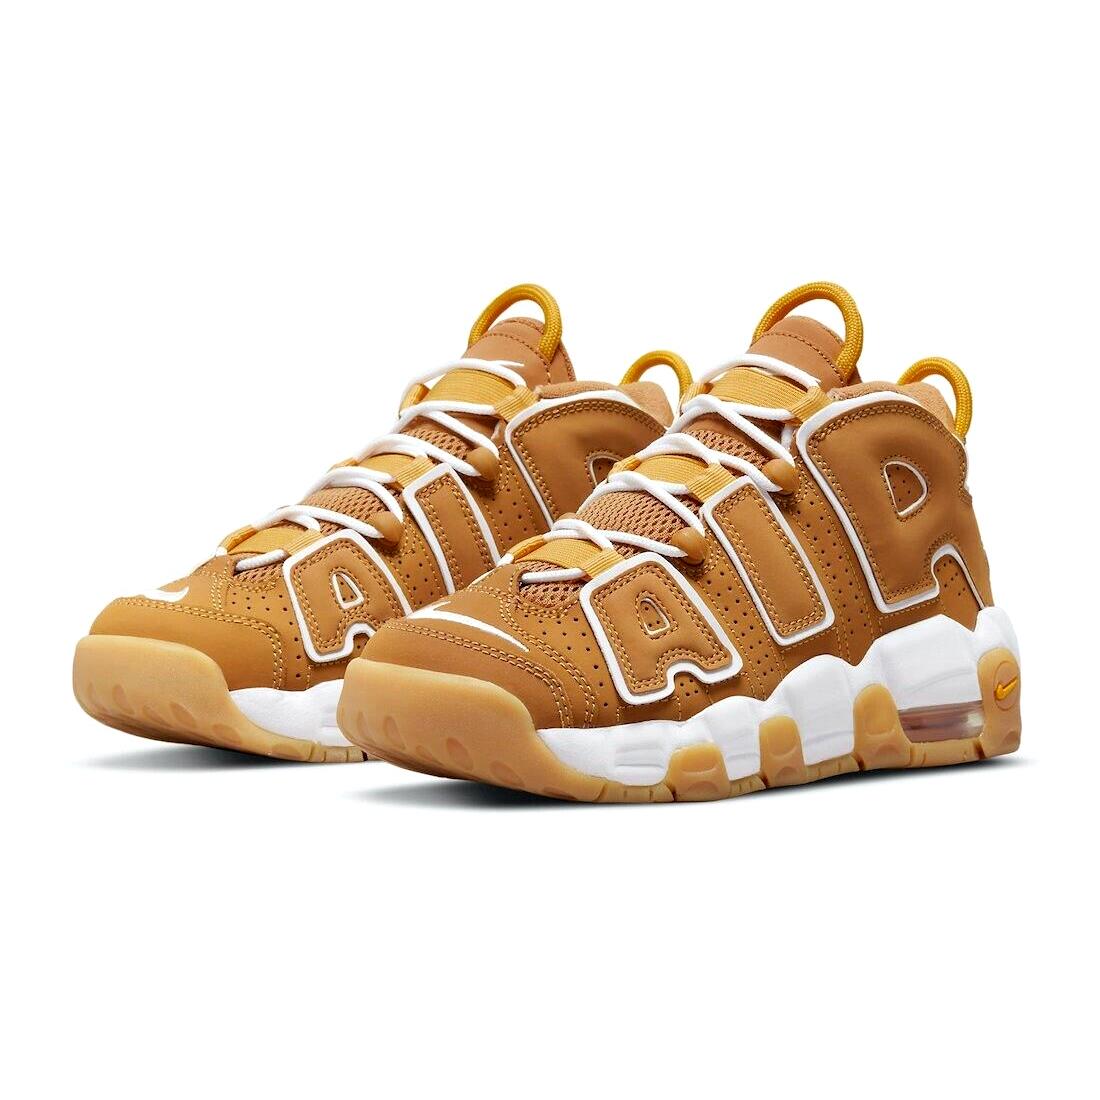 Nike Air More Uptempo Womens Size 6 Sneaker Shoes DQ4713 700 sz 4.5Y